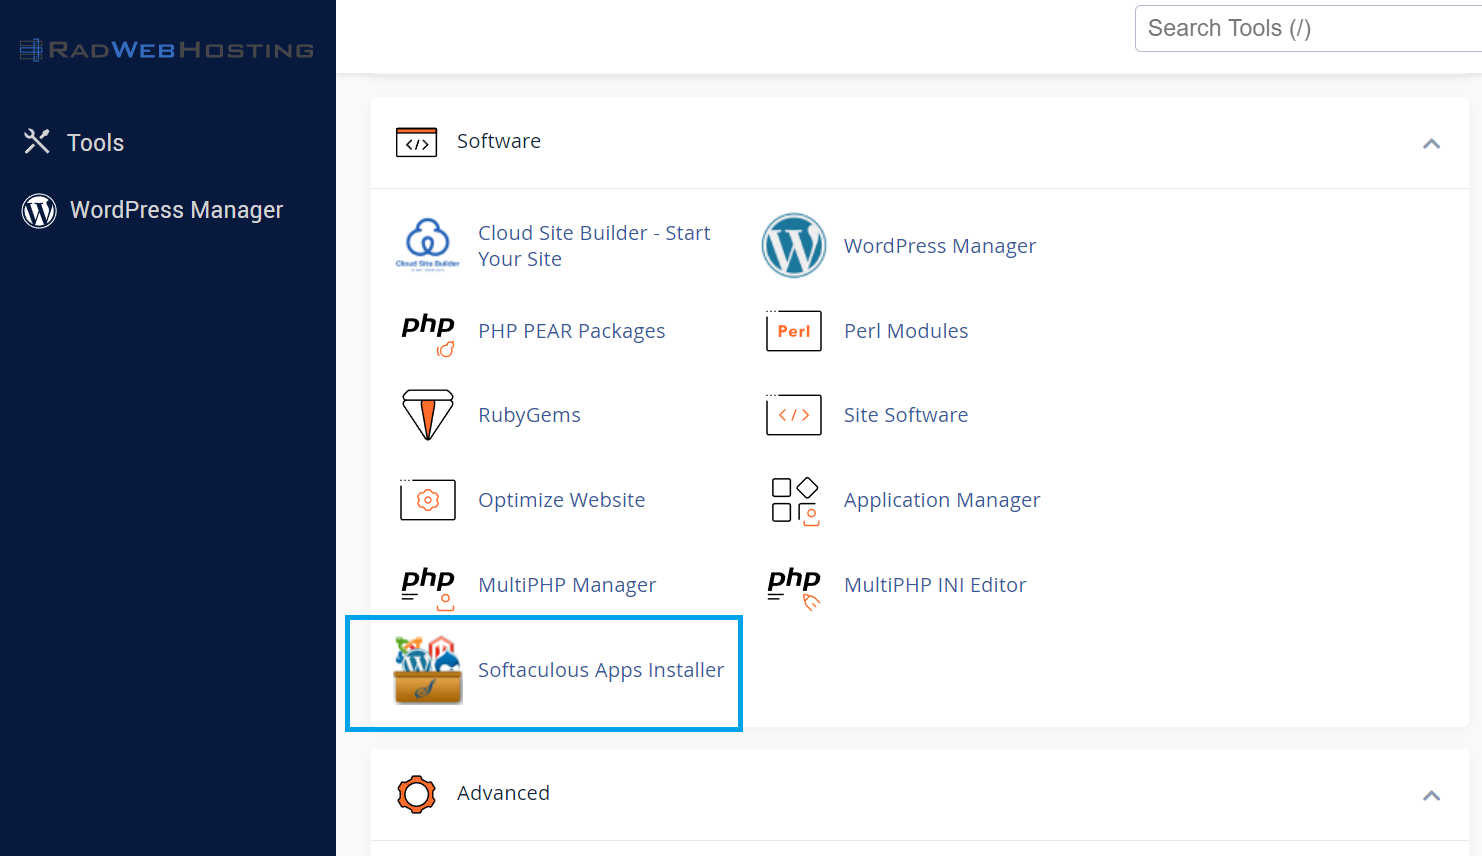 Navigate to Softaculous Apps Installer in cPanel